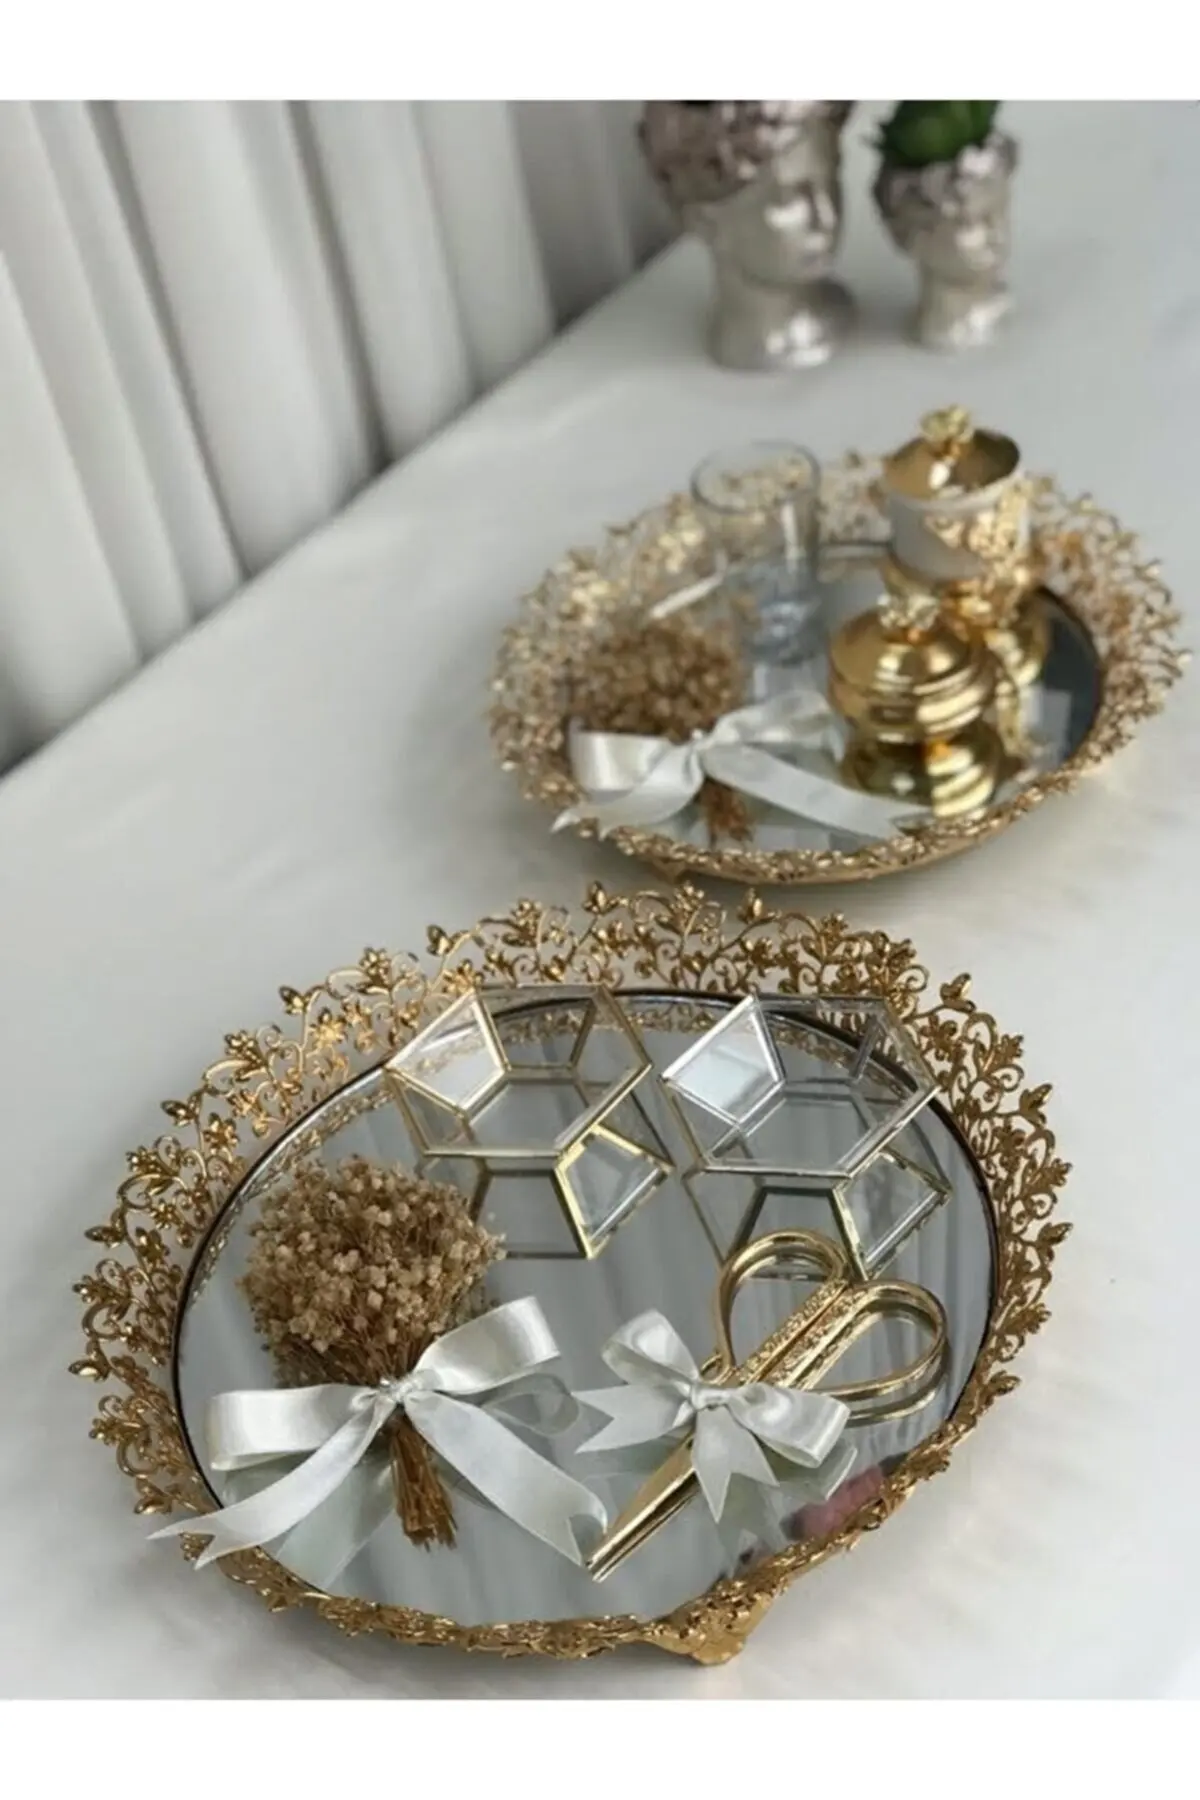 

2 PCs Promise Engagement Tray Groom Coffee Tray Set Gold Crown Series Bride Wedding Jewelry For Bridal Veil Marriage Engagement